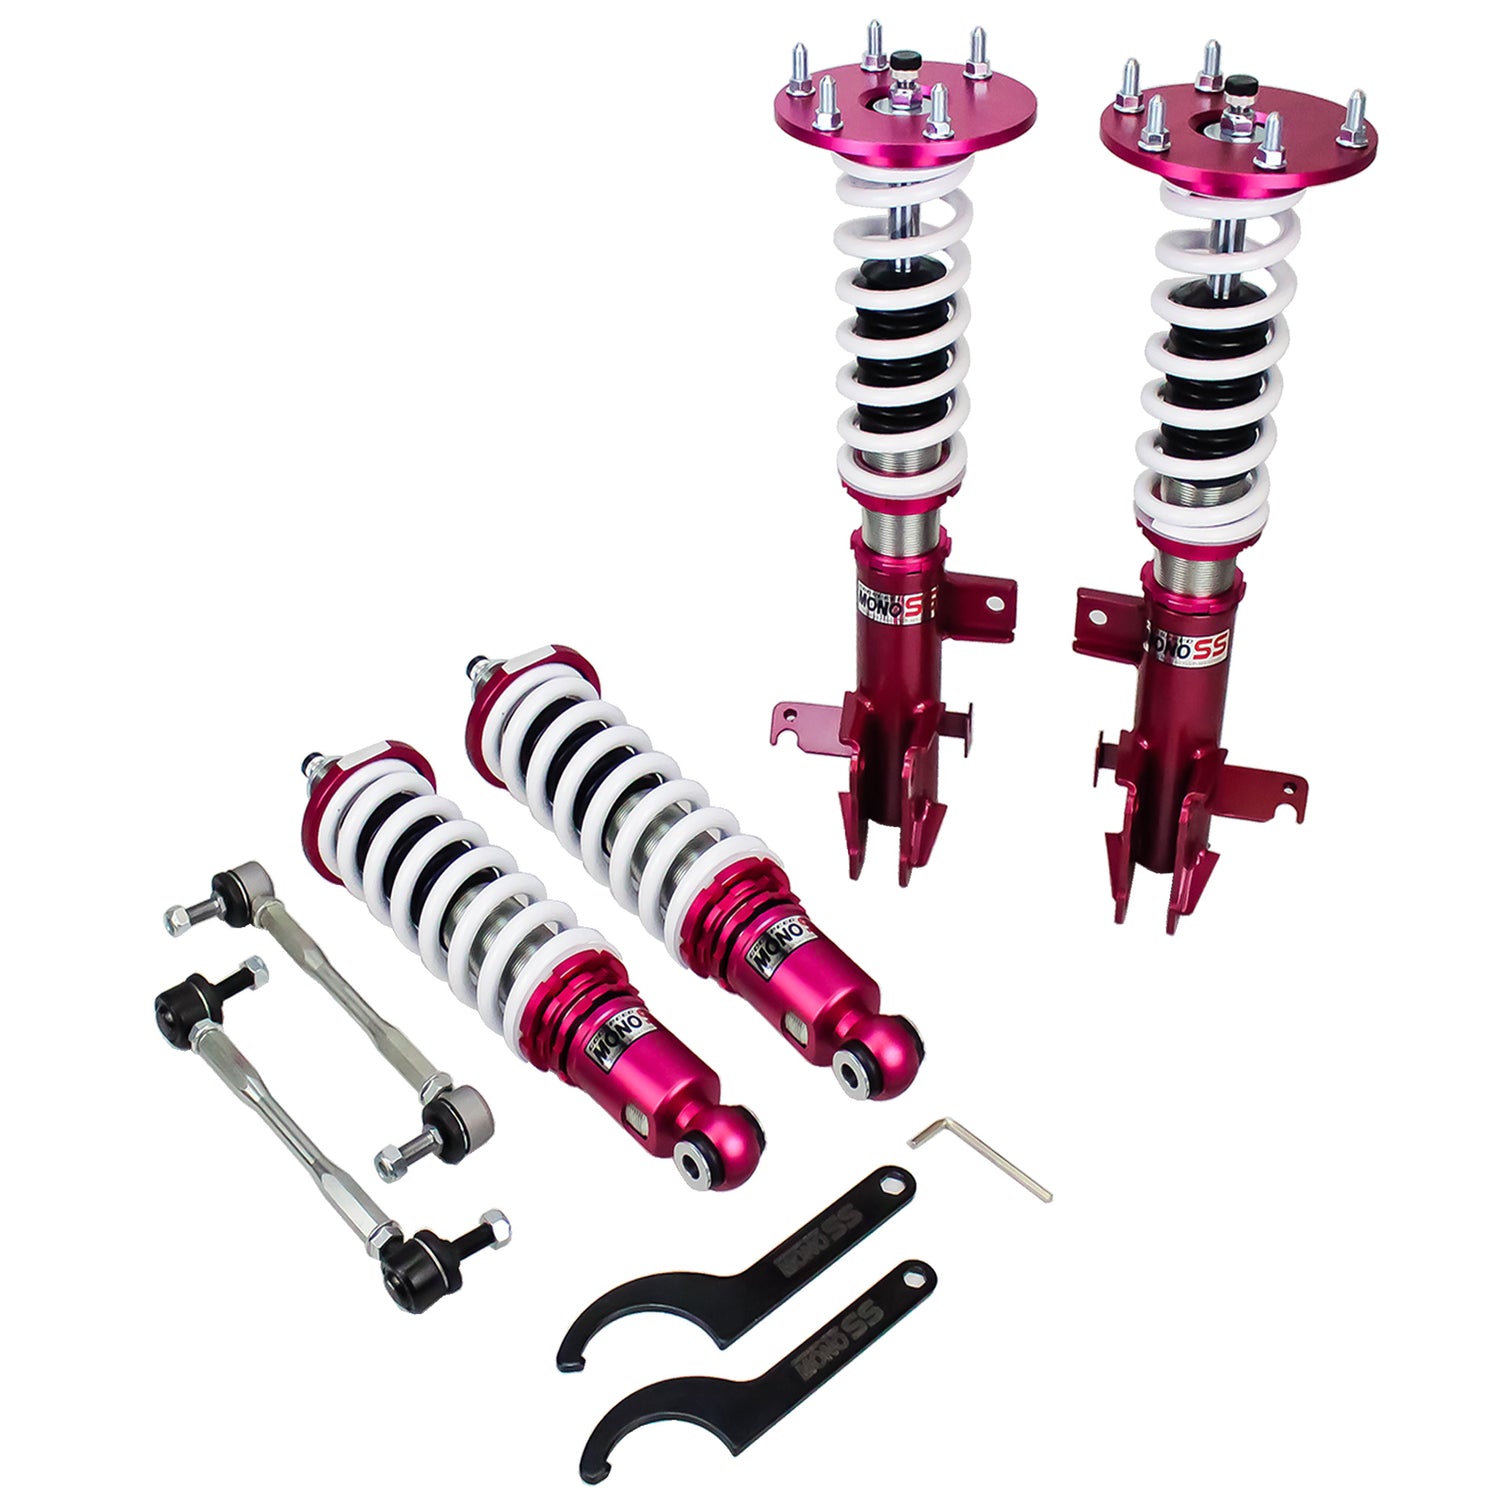 Godspeed MSS0980 MonoSS Coilover Lowering Kit, Fully Adjustable, Ride Height, Spring Tension And 16 Click Damping, Honda CRV(RM1/RM3, RM4) 12-16